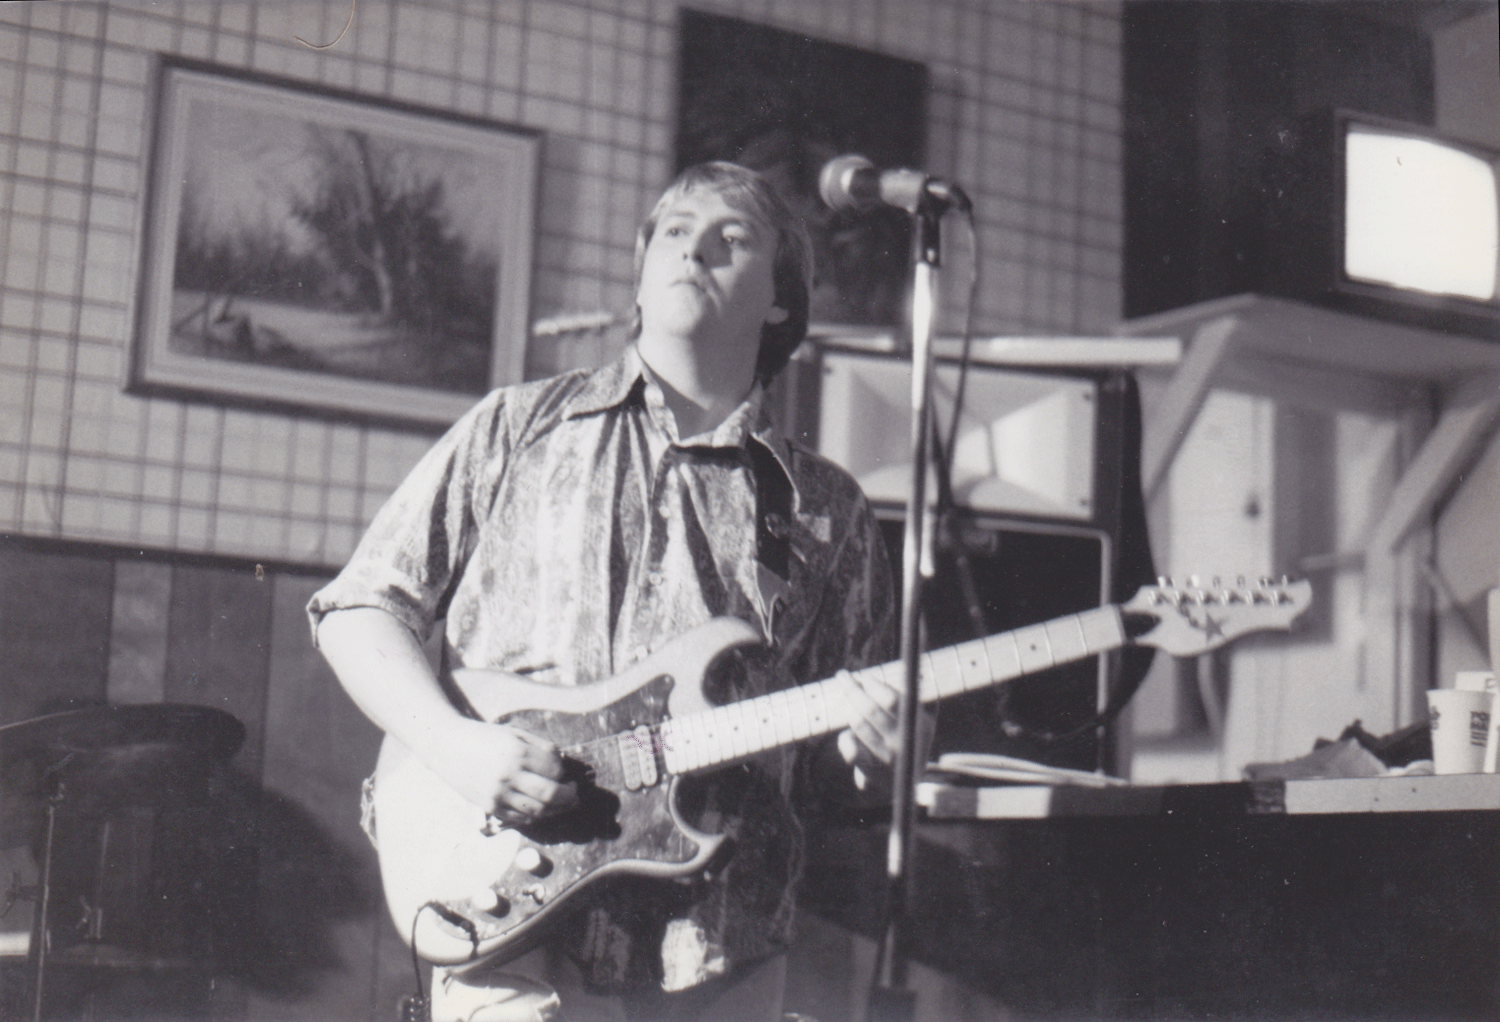 Ed Tucker of The Value at Dale's, Chattanooga, TN 1984